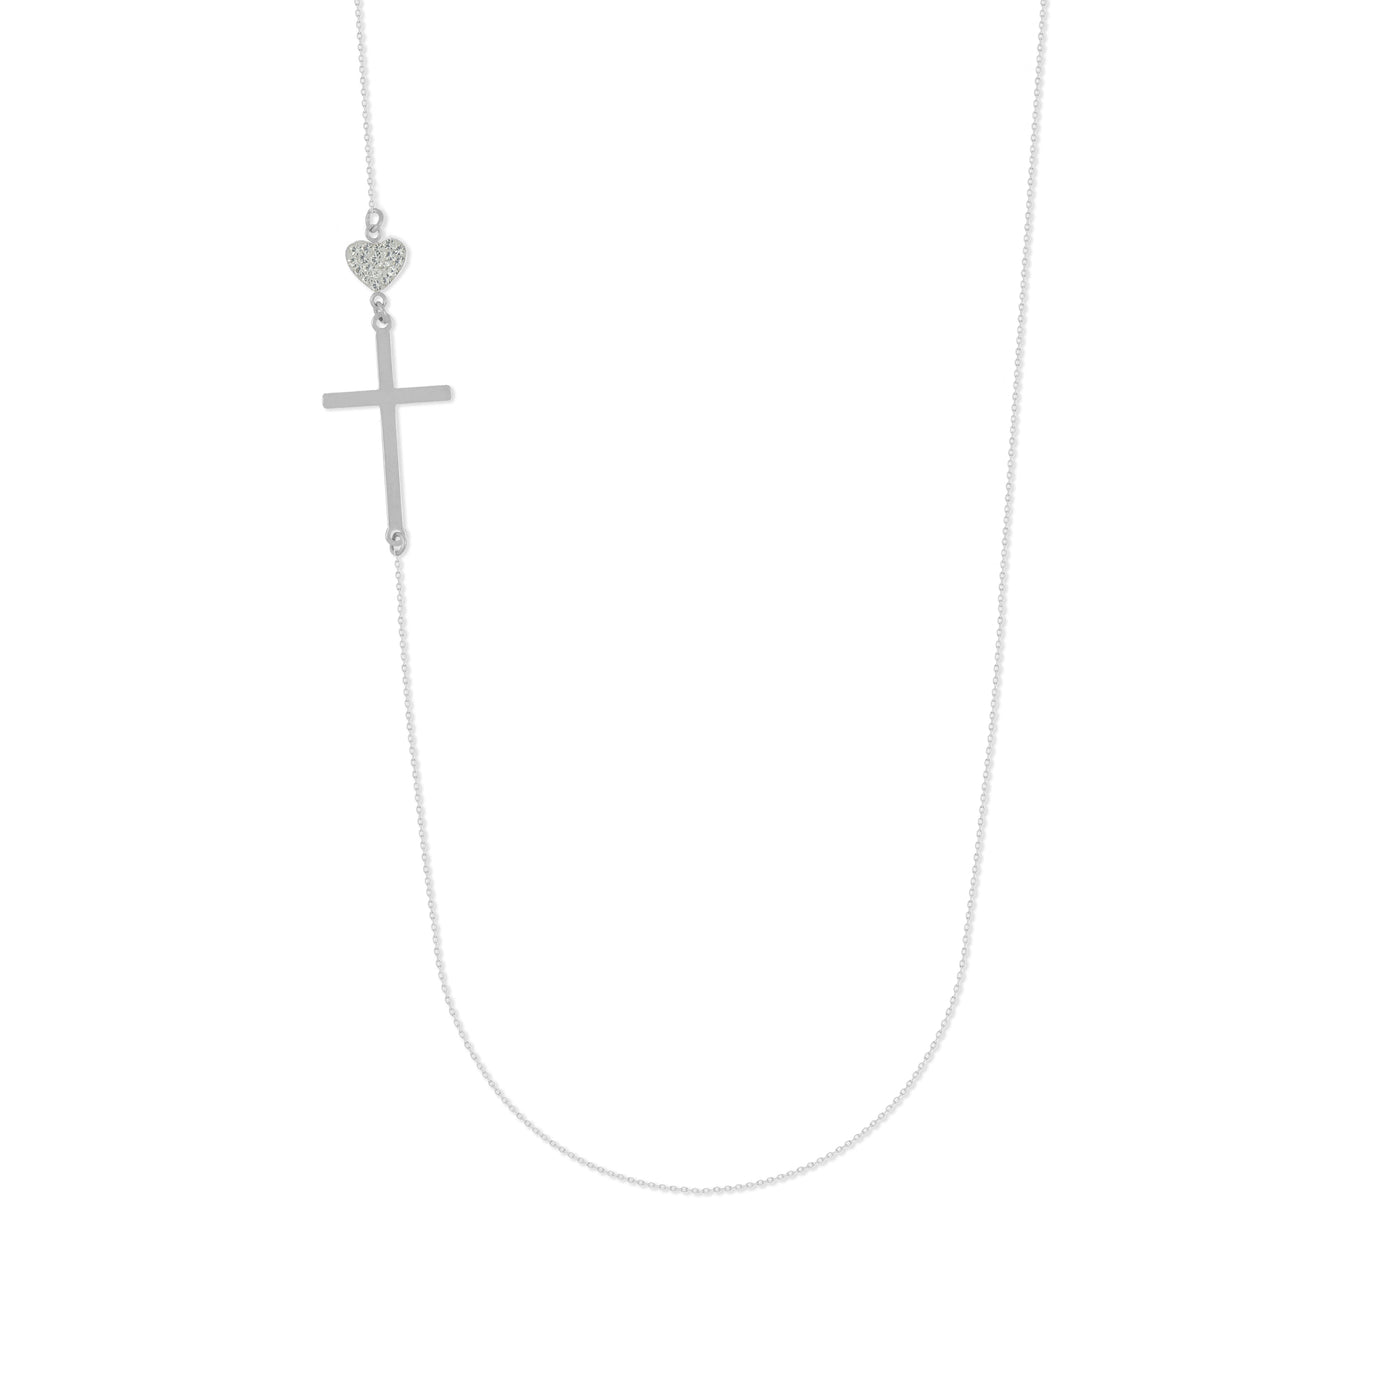 The Love Cross Necklace